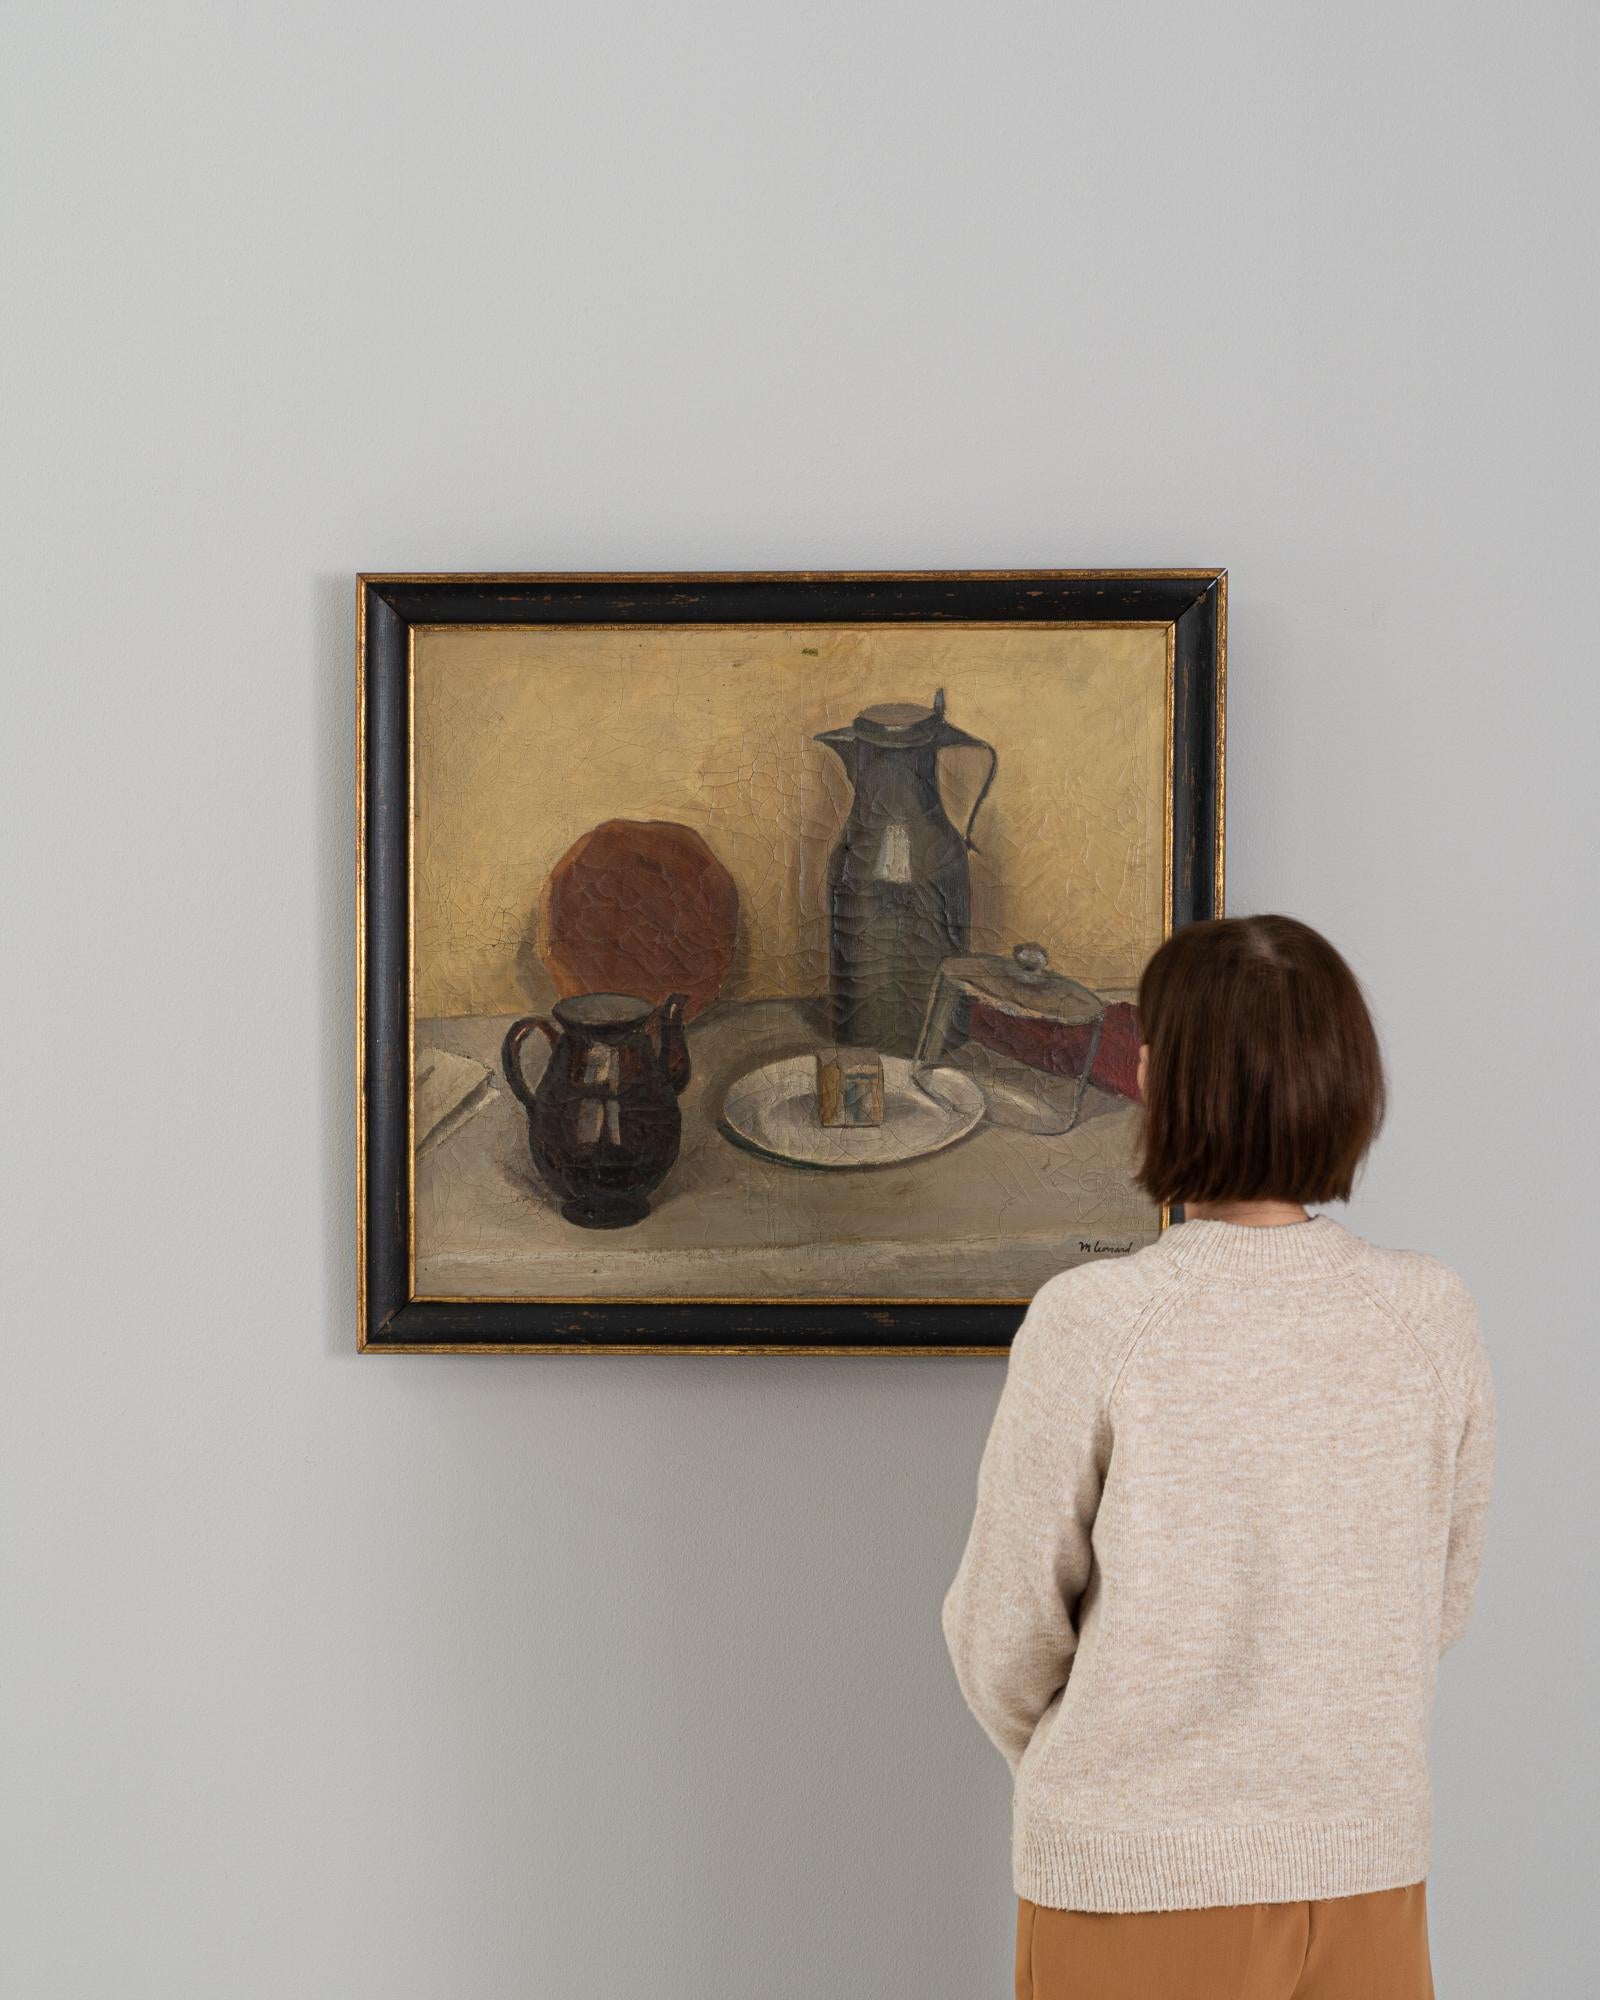 This 20th Century Belgian Painting is a serene still life, capturing the simple elegance of everyday objects arranged with a thoughtful composition. The artwork’s earthy palette is soothing, evoking a sense of calm and timelessness. A jug, plate,